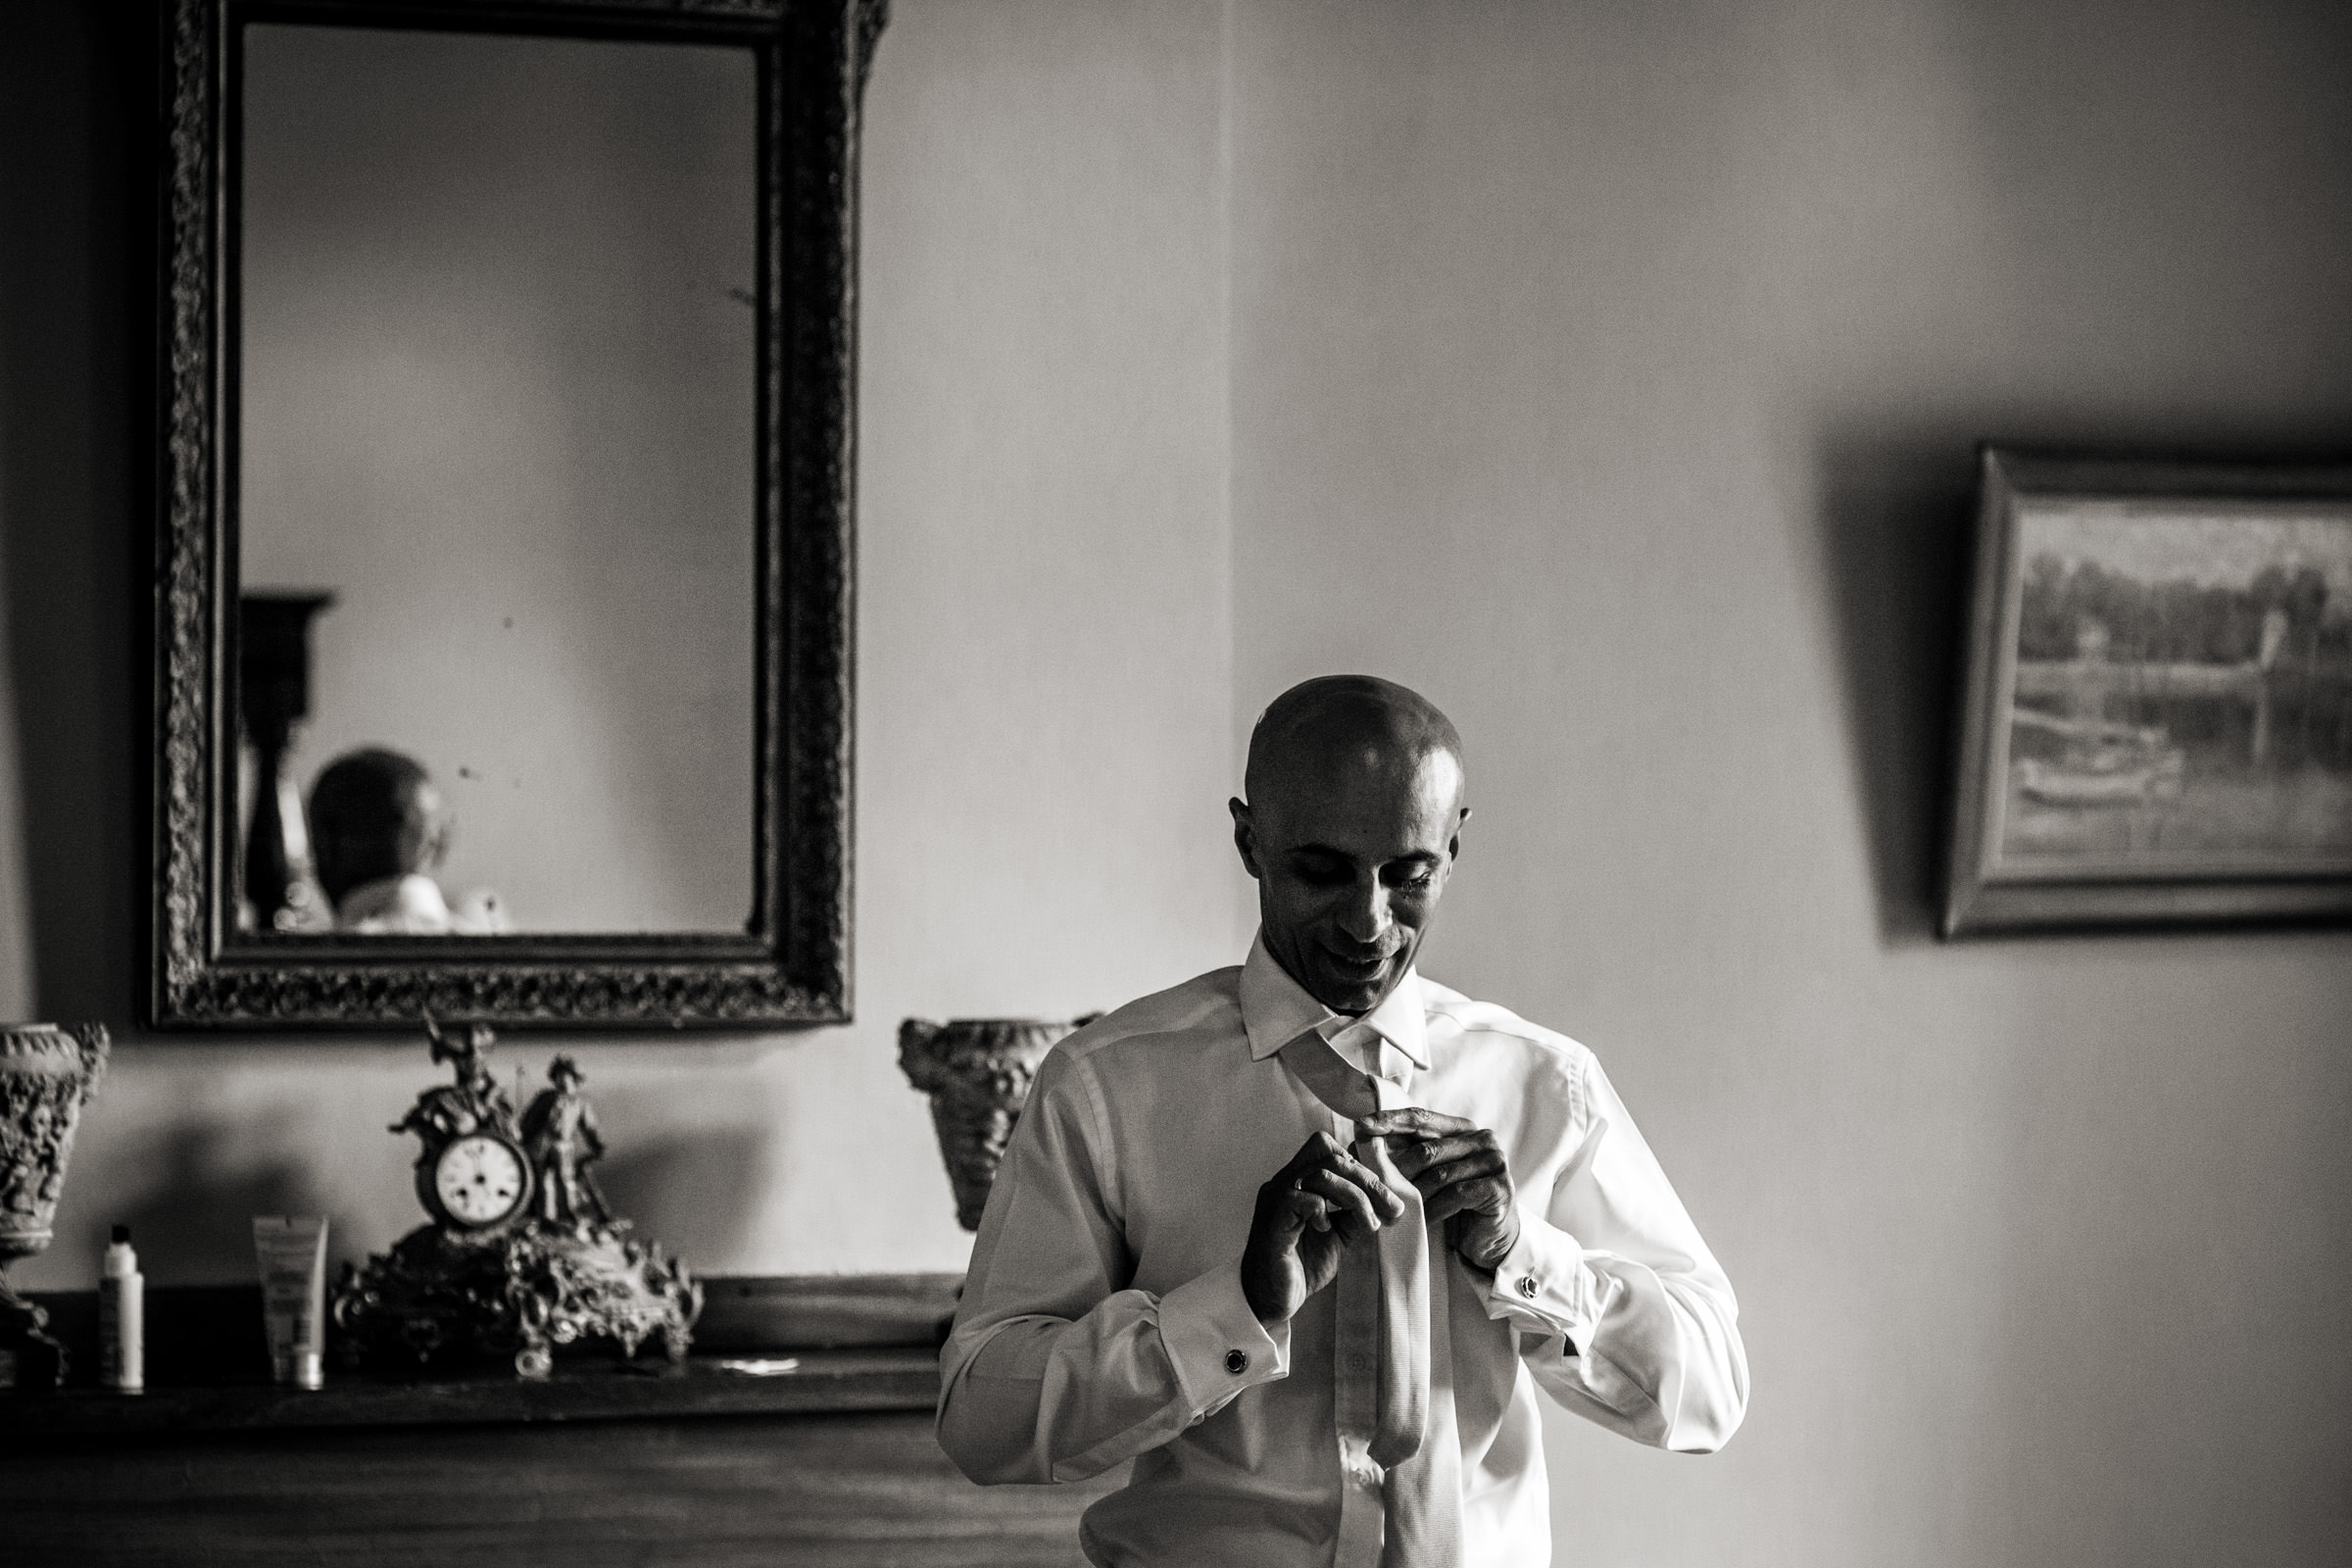 Uk Wedding photographers working at chateau de lisse in gascony 016.jpg